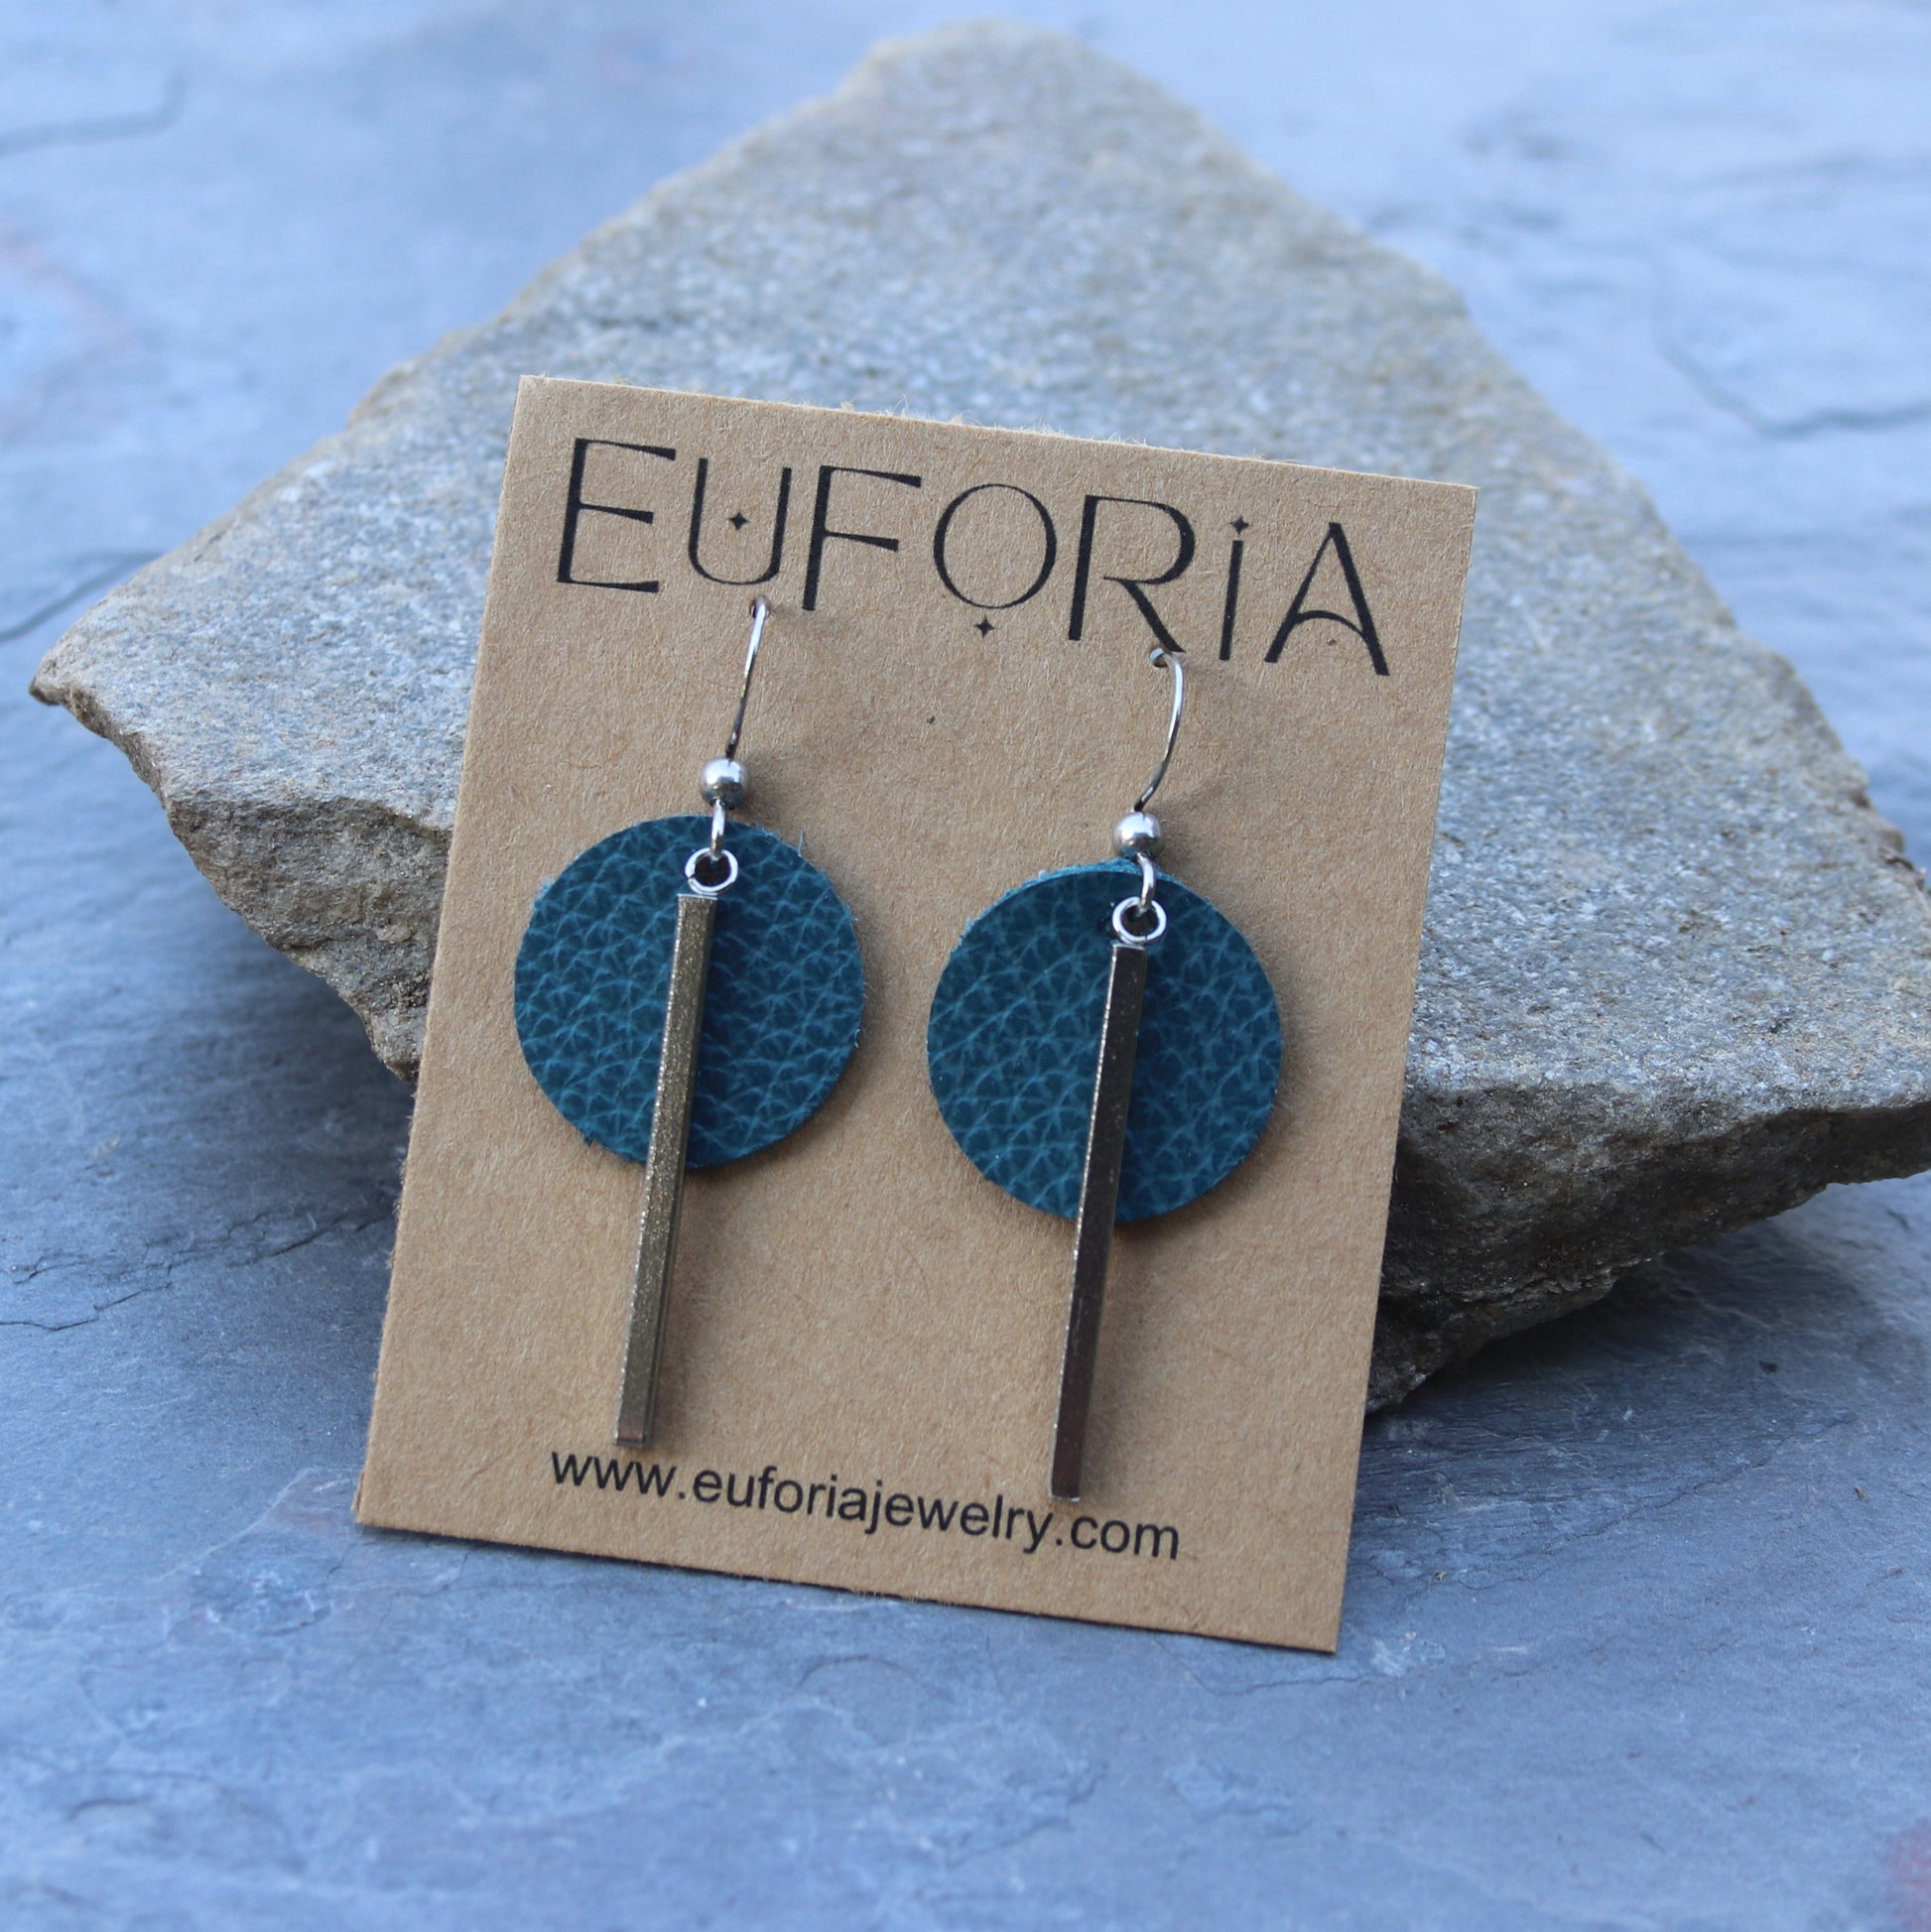 Marine blue color leather .75" circles with stainless bar charm dangle earrings